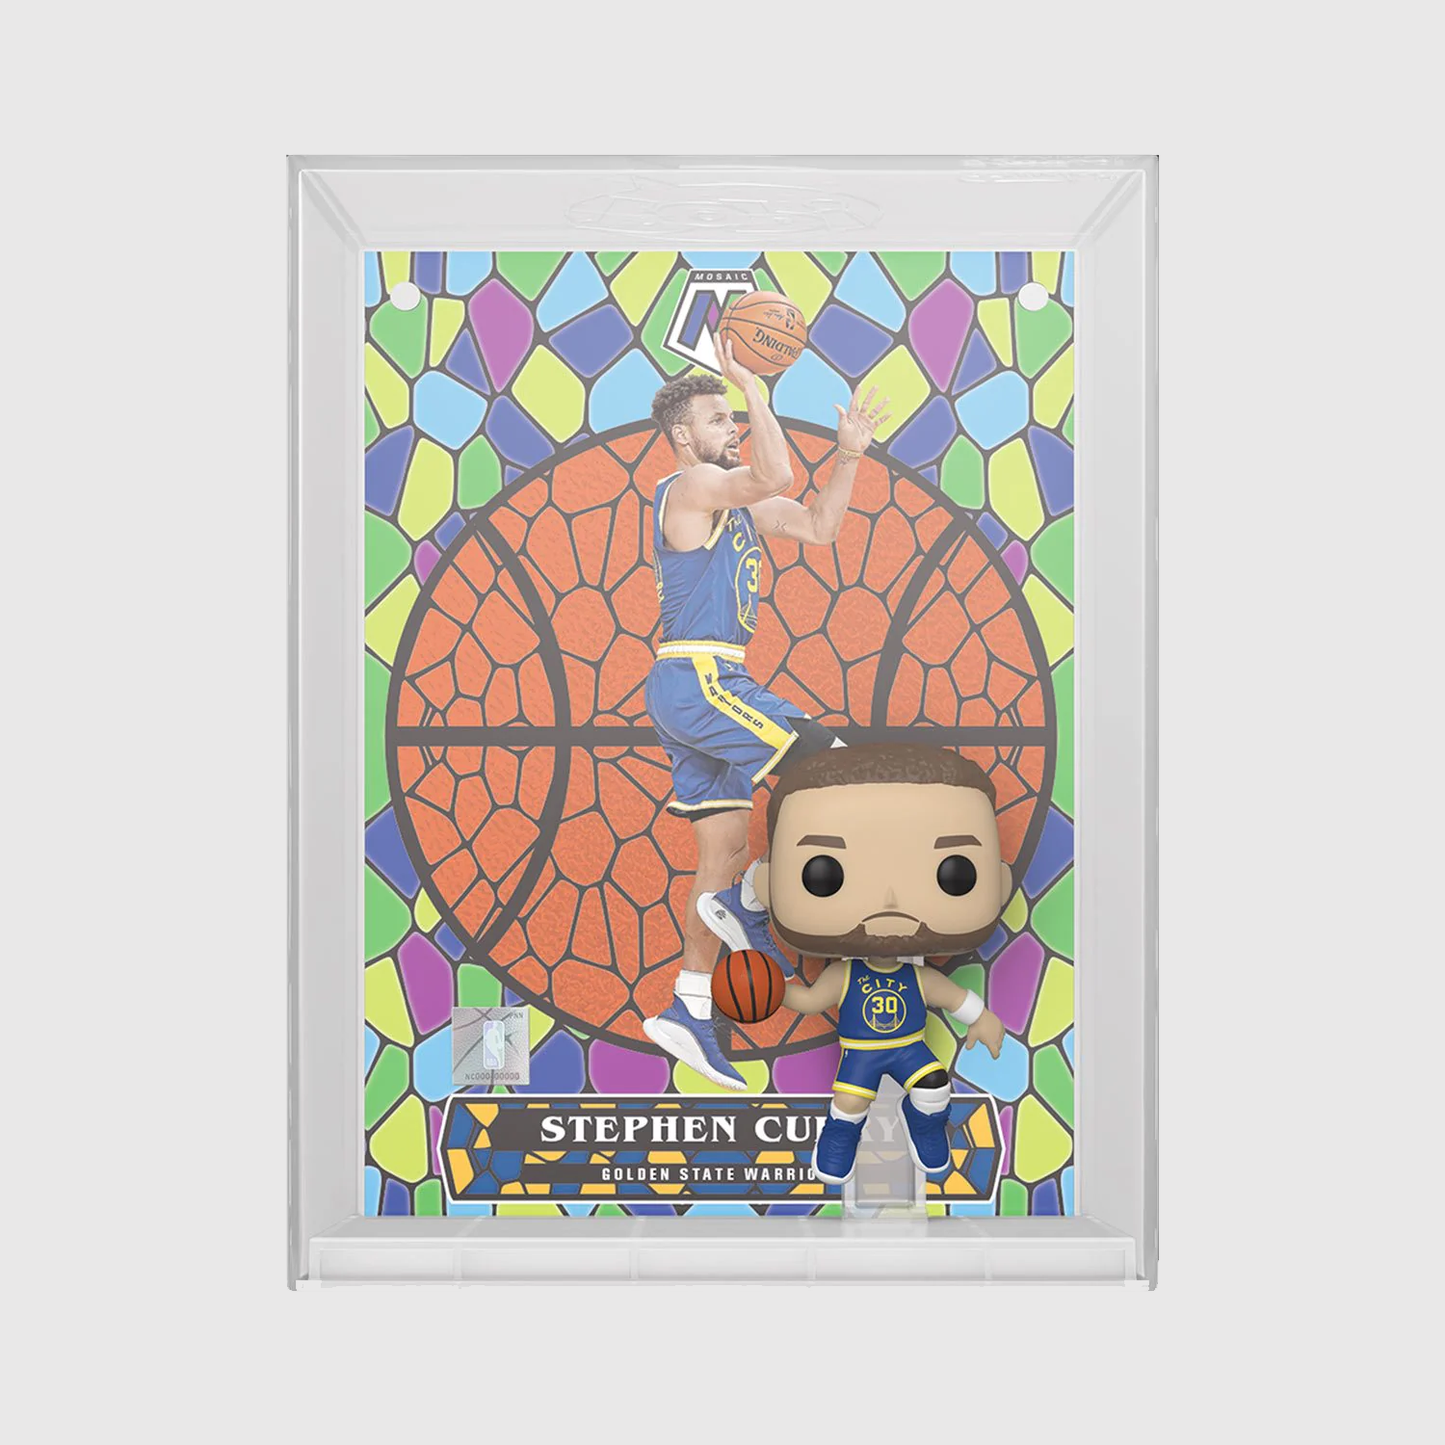 (PRE-ORDER) Funko POP! Trading Cards: Stephen Curry - Mosaic Prism #15 (Panini Exclusive)